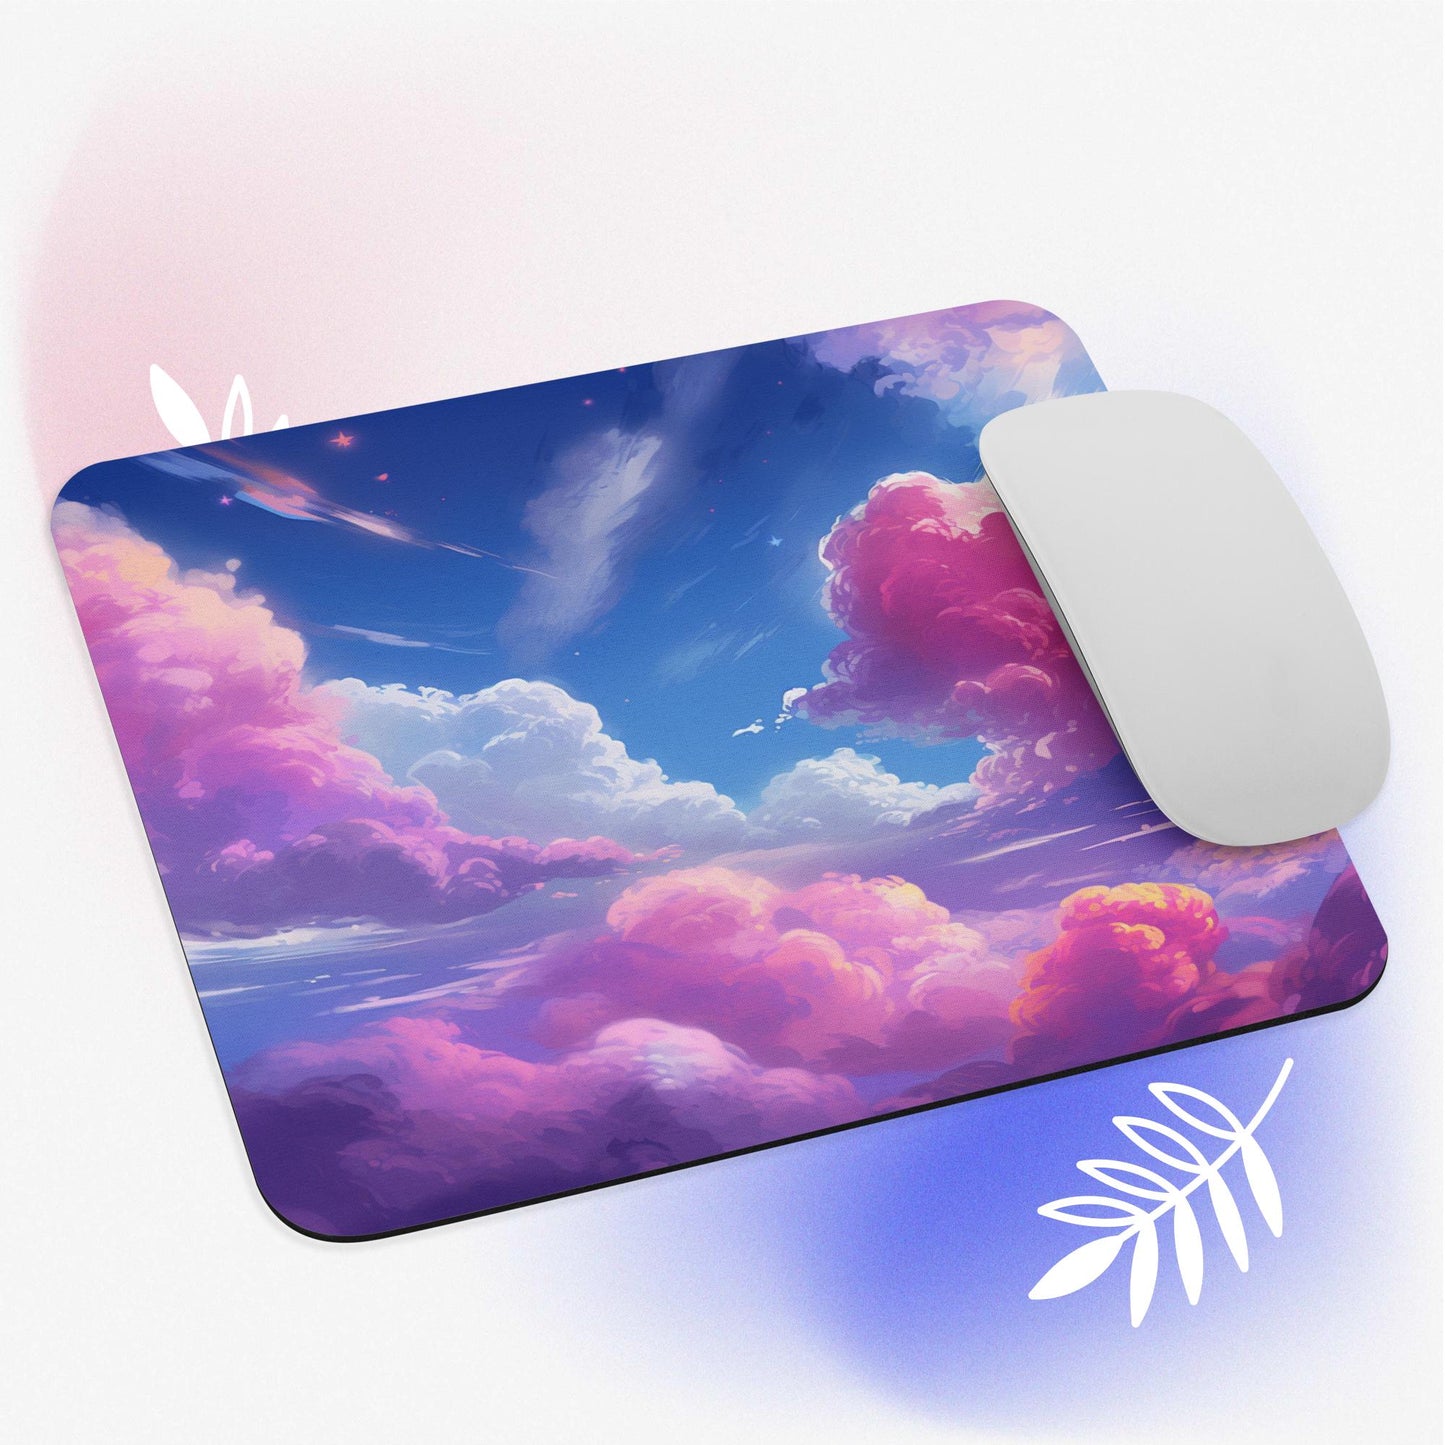 Clouds Small Mousepad for Desktops, Non-Slip Rubber Base, Waterproof Mouse Mat, Mini Mouse Pad for Women Kids Men, Gaming Mouse Mat for Computer Laptop Home Office